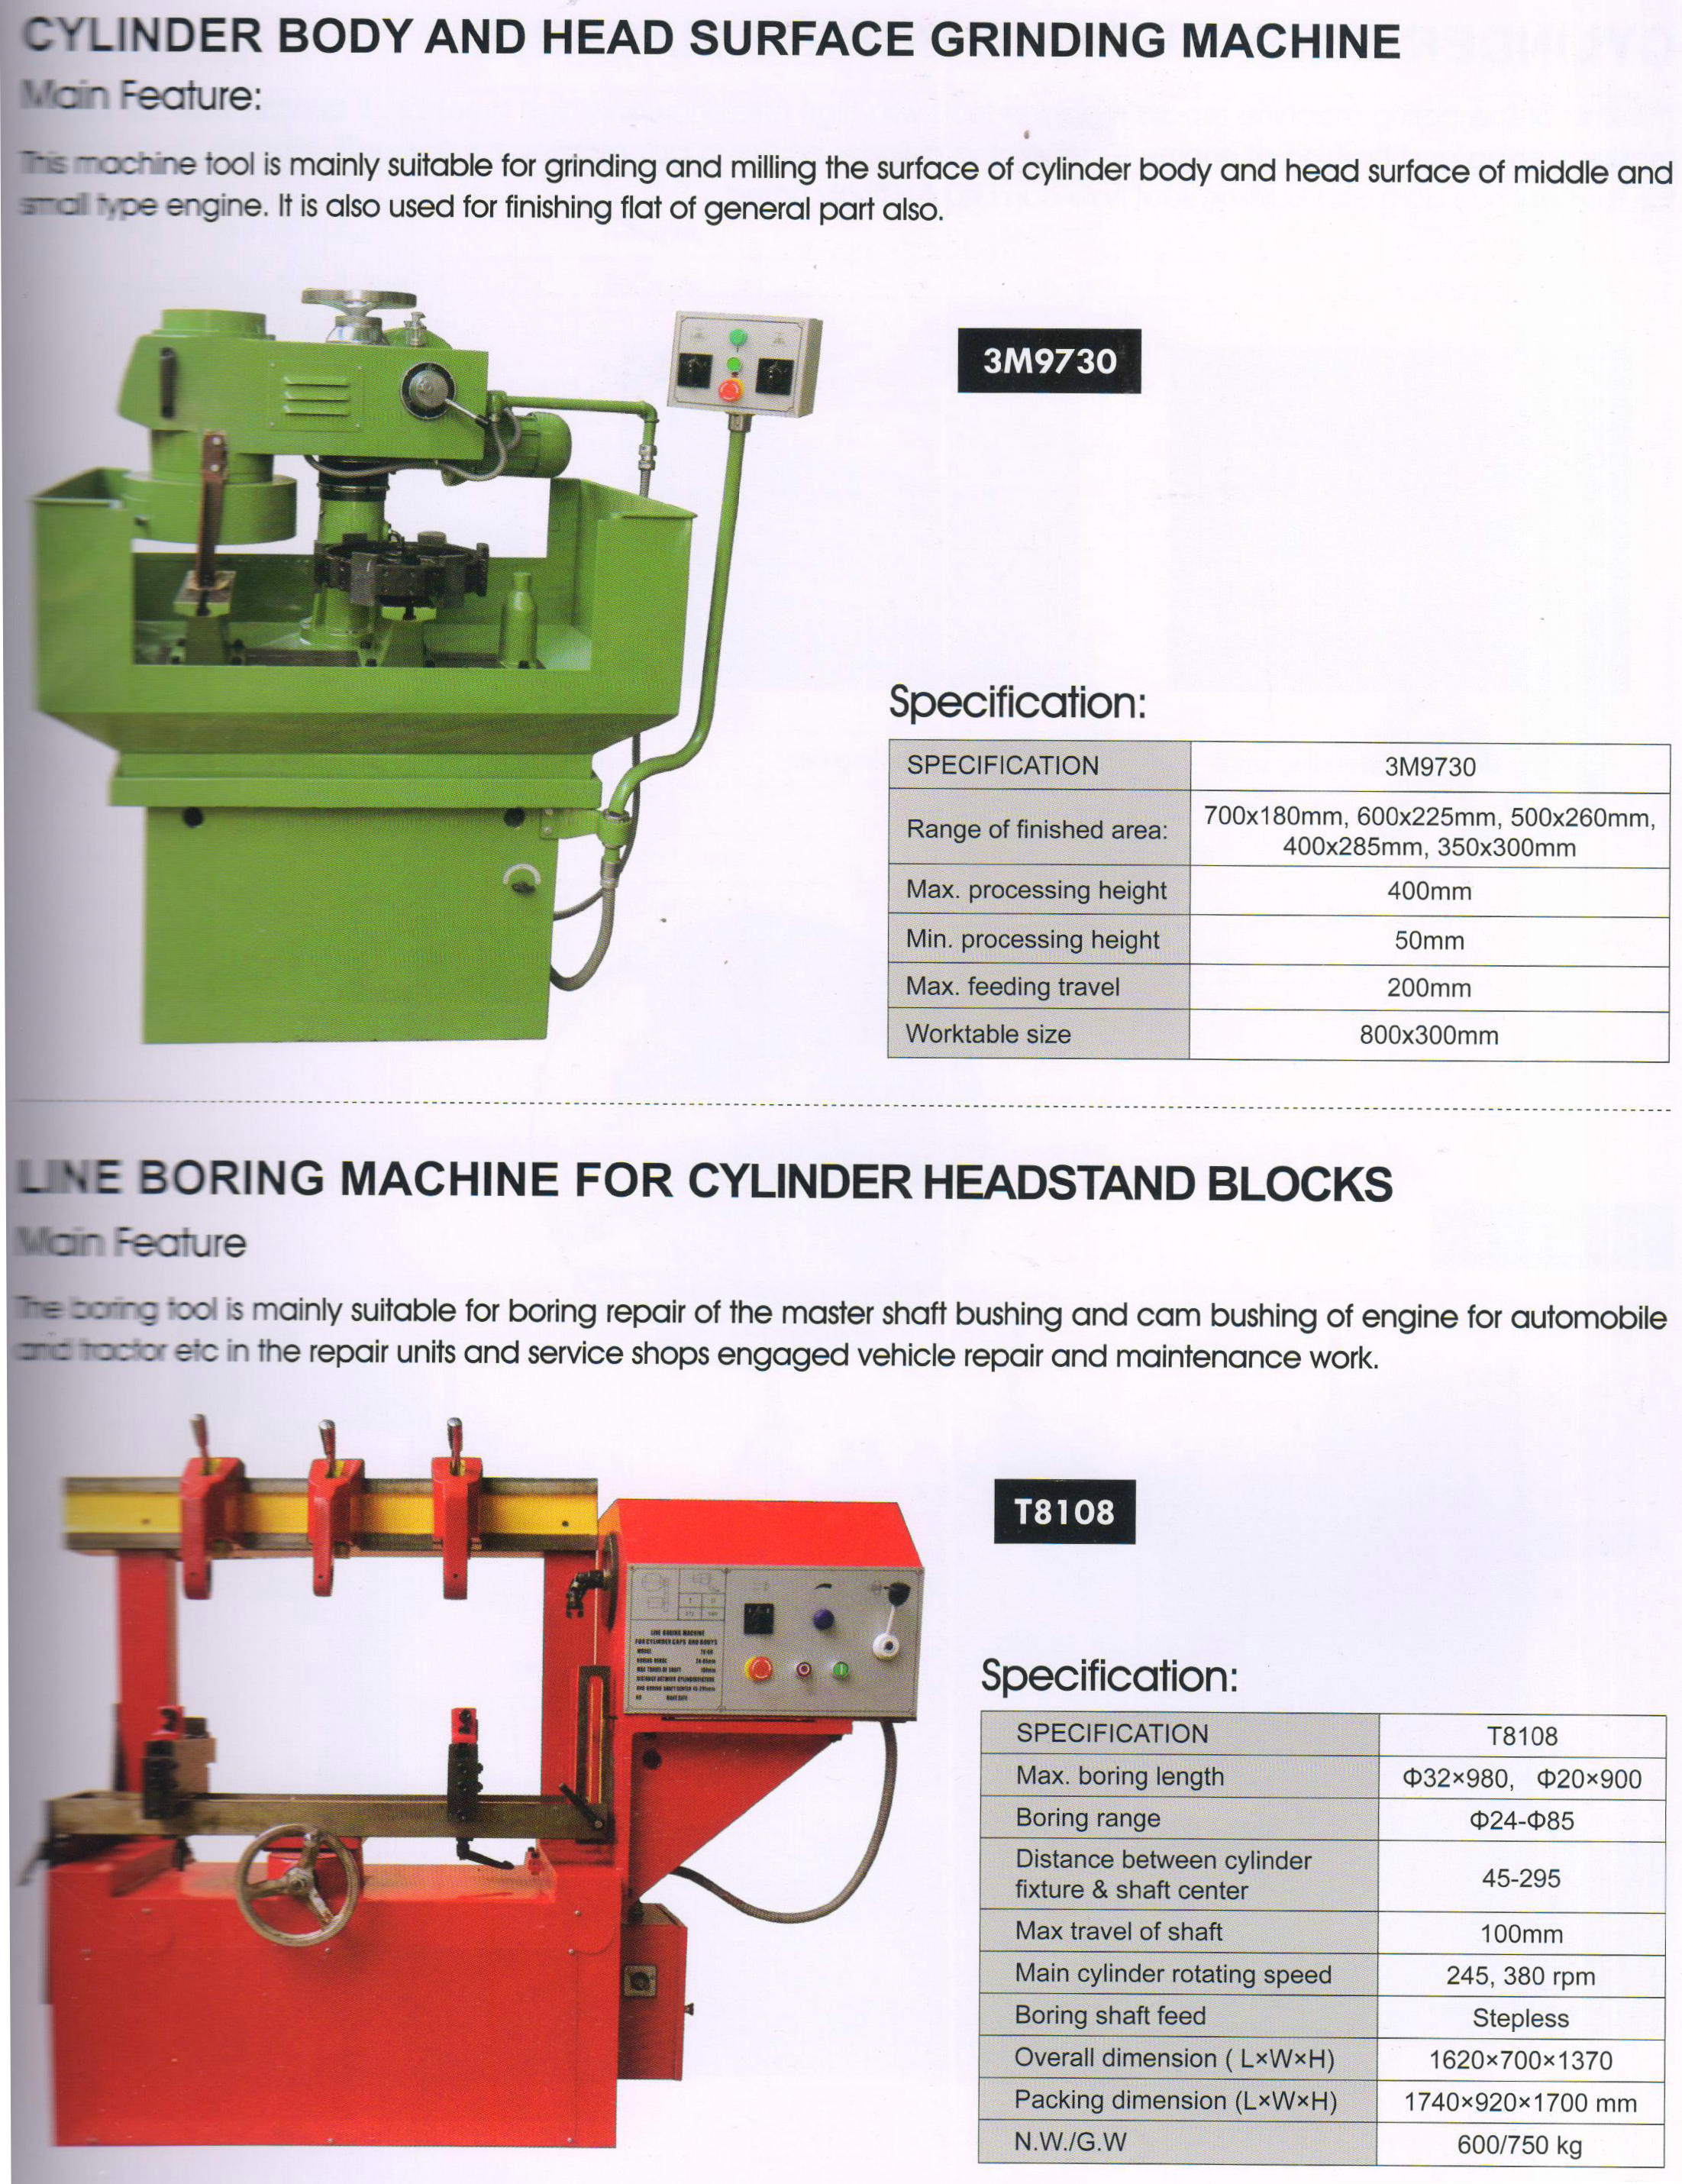 LINE BORING MACHINE FOR CYLINDER HEADSTAND BLOCKS T8108